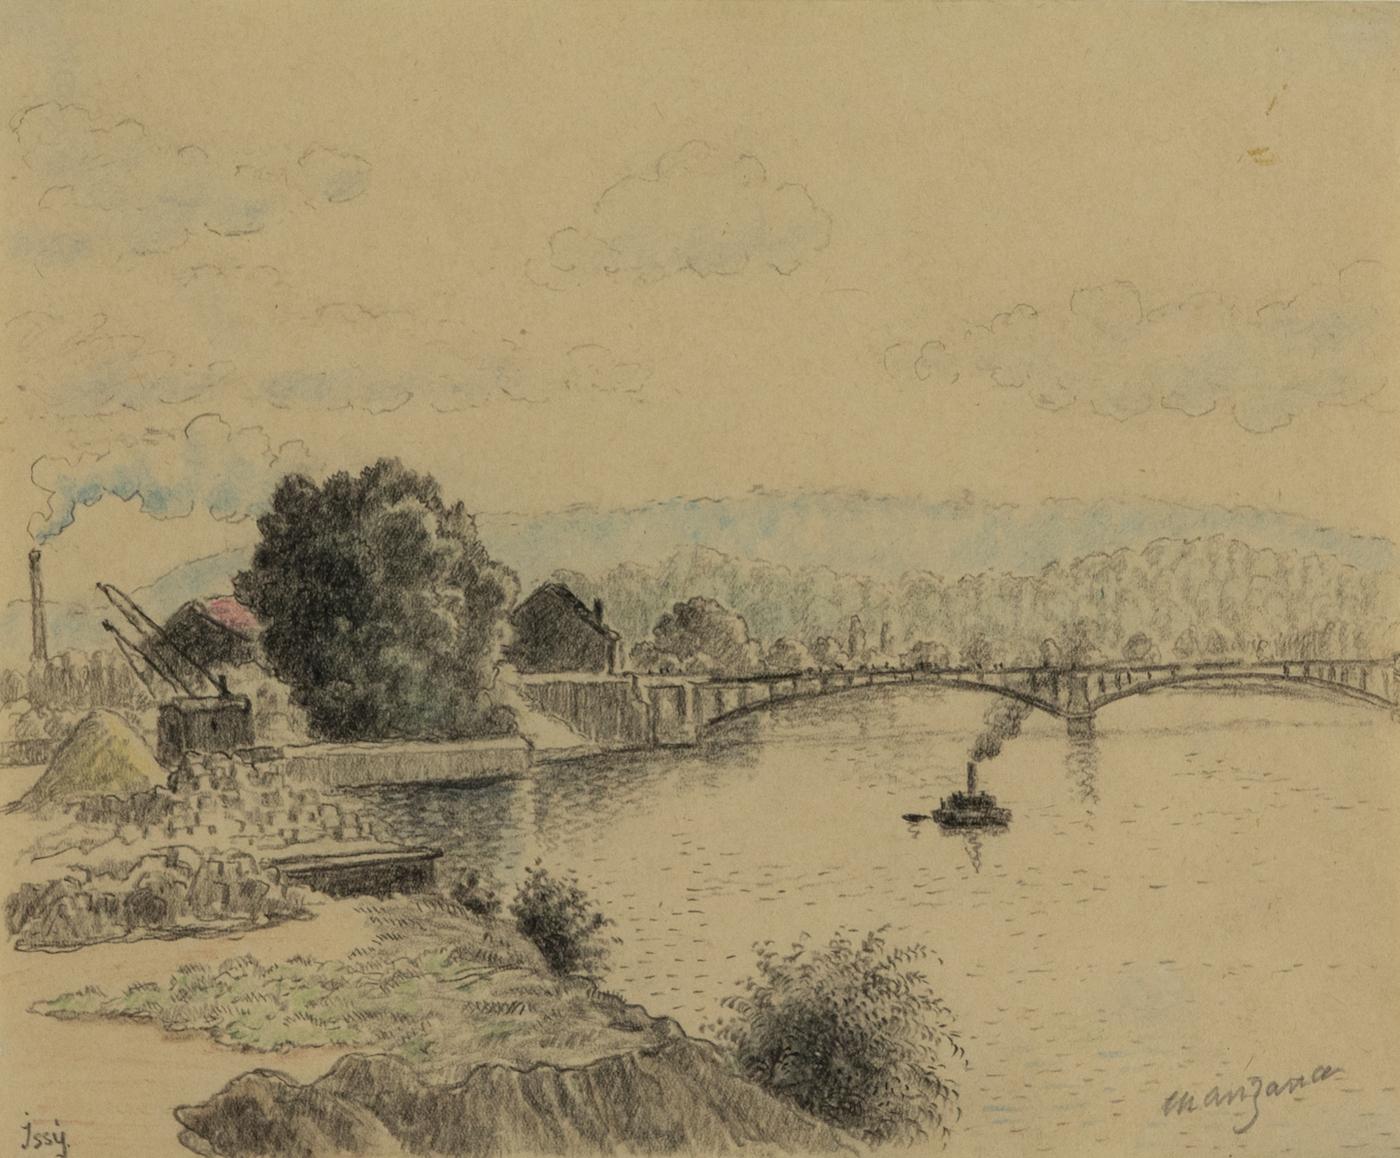 Issy, France by Georges Manzana Pissarro, 1890 - Charcoal & Crayon on Paper